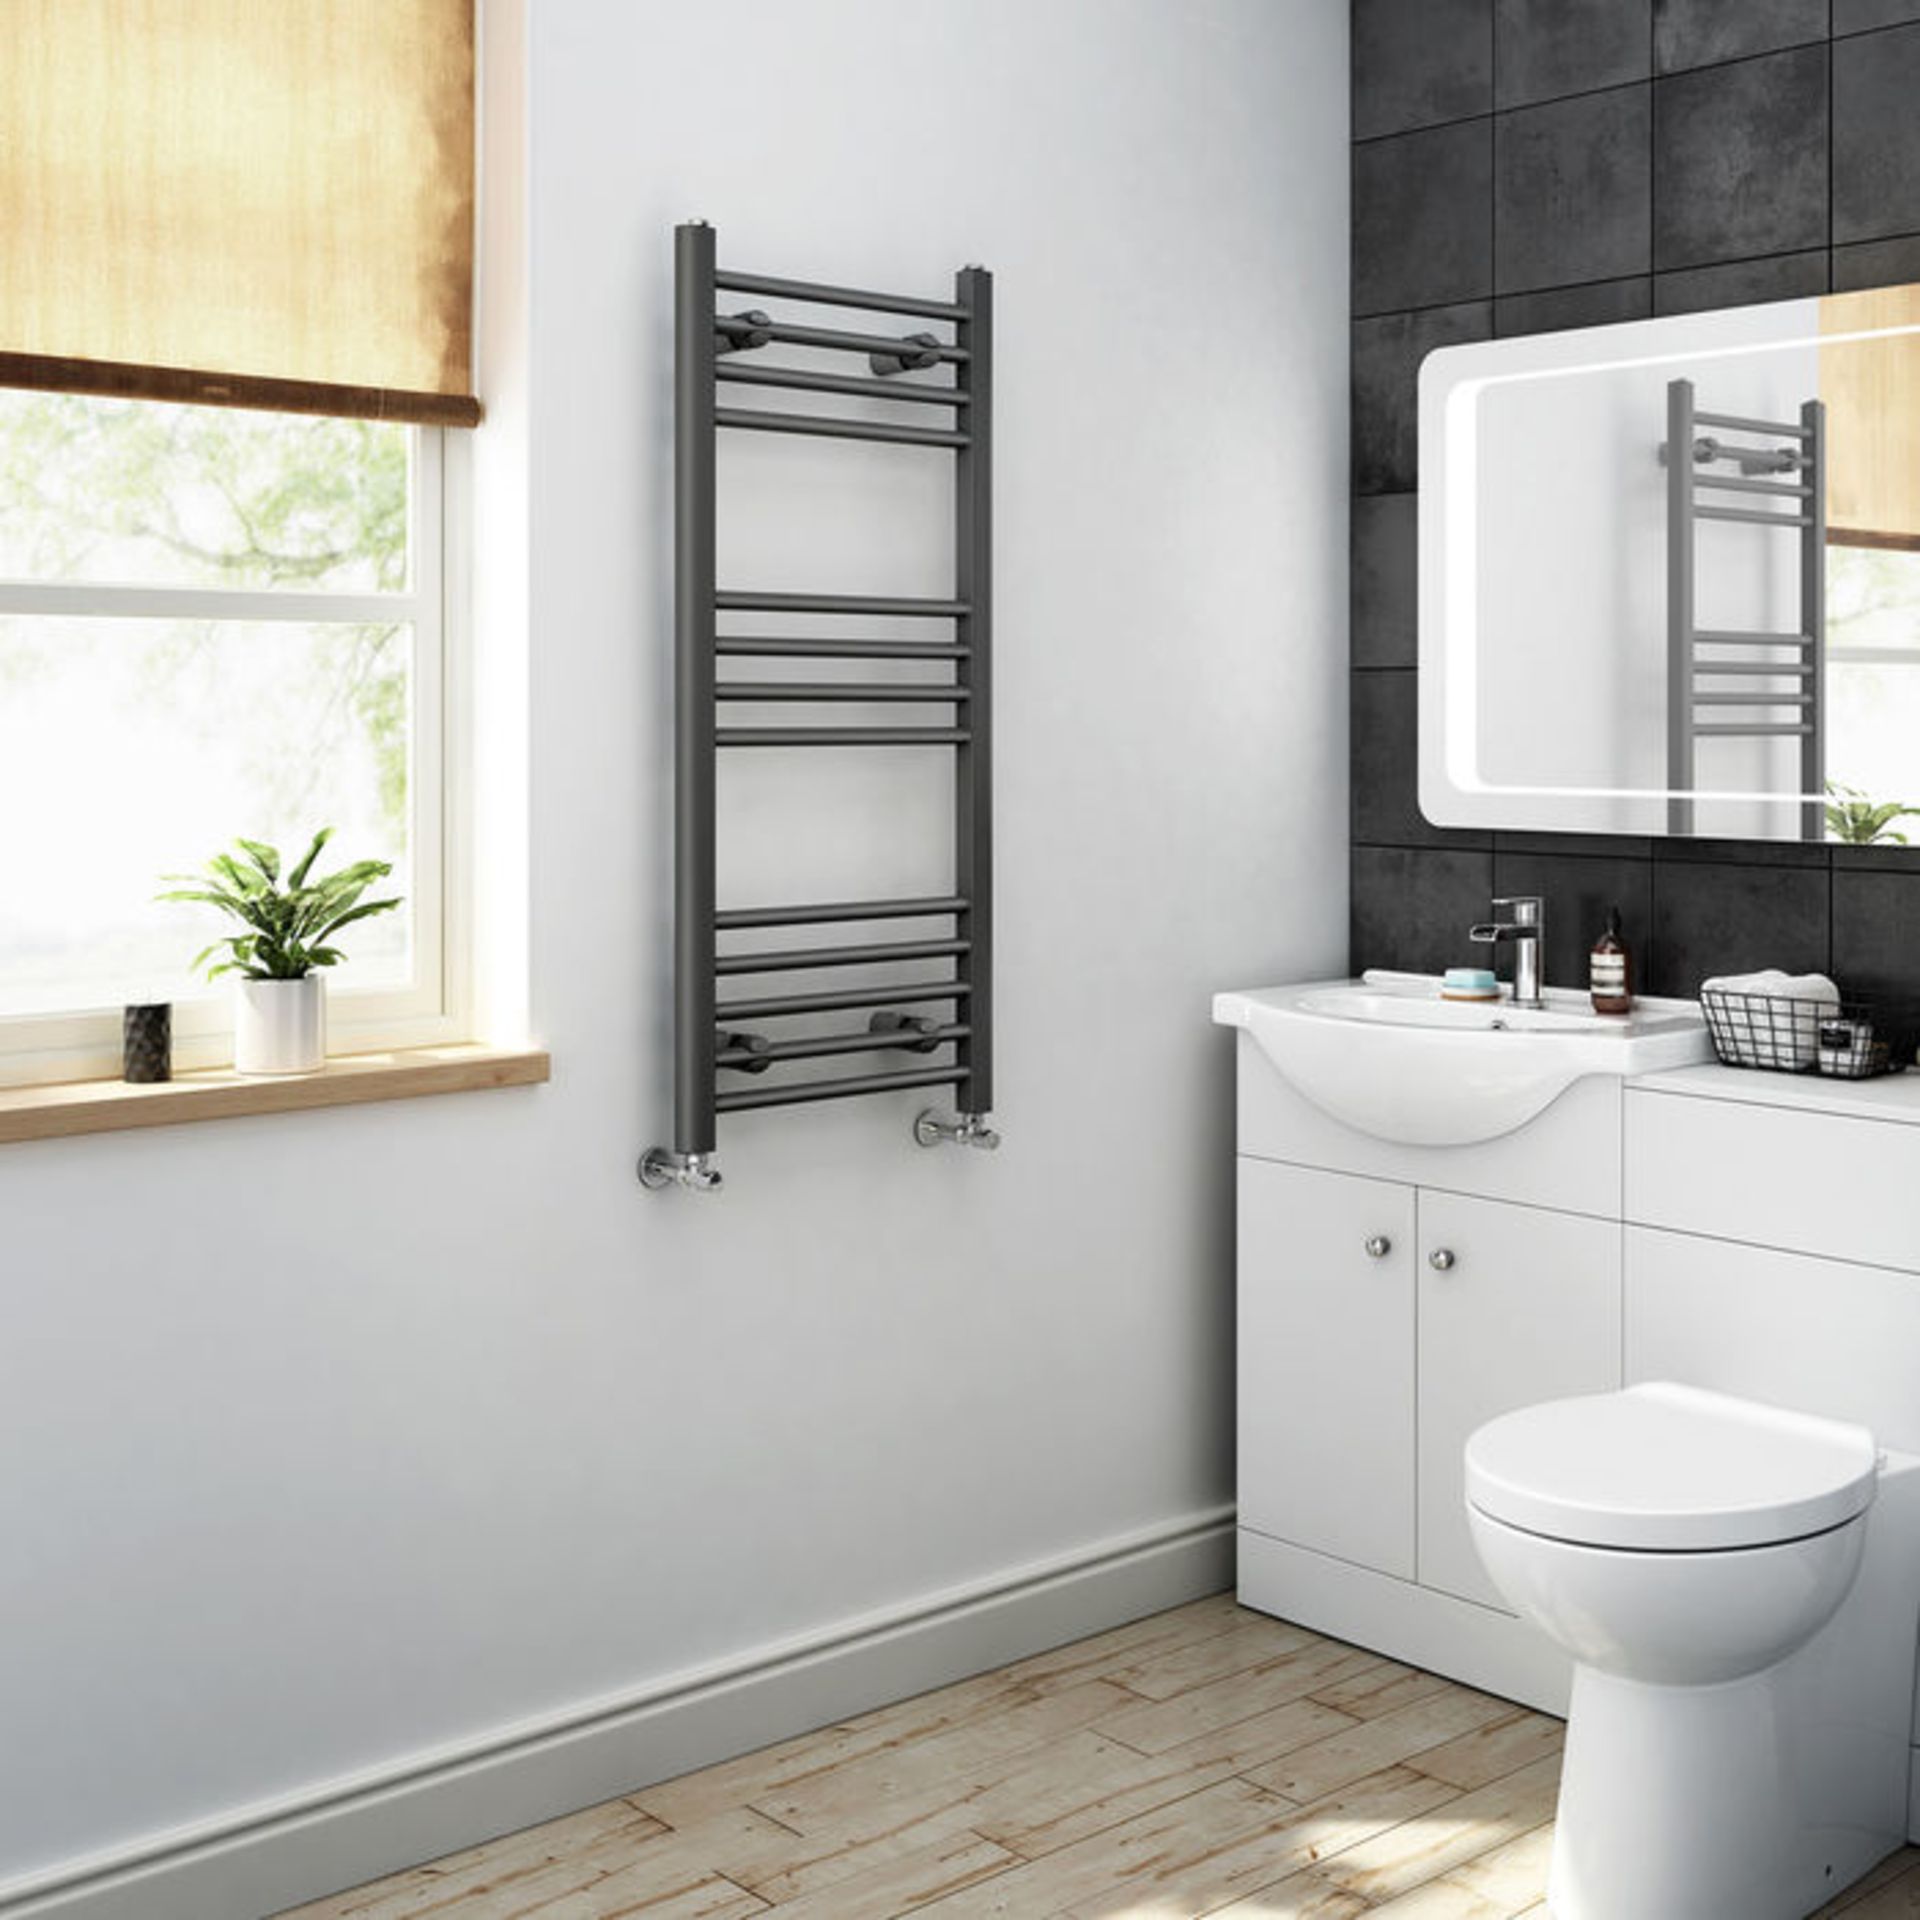 (YC37) 974x450mm - 20mm Tubes - Anthracite Heated Straight Rail Ladder Towel Radiator. Corrosion - Image 2 of 3